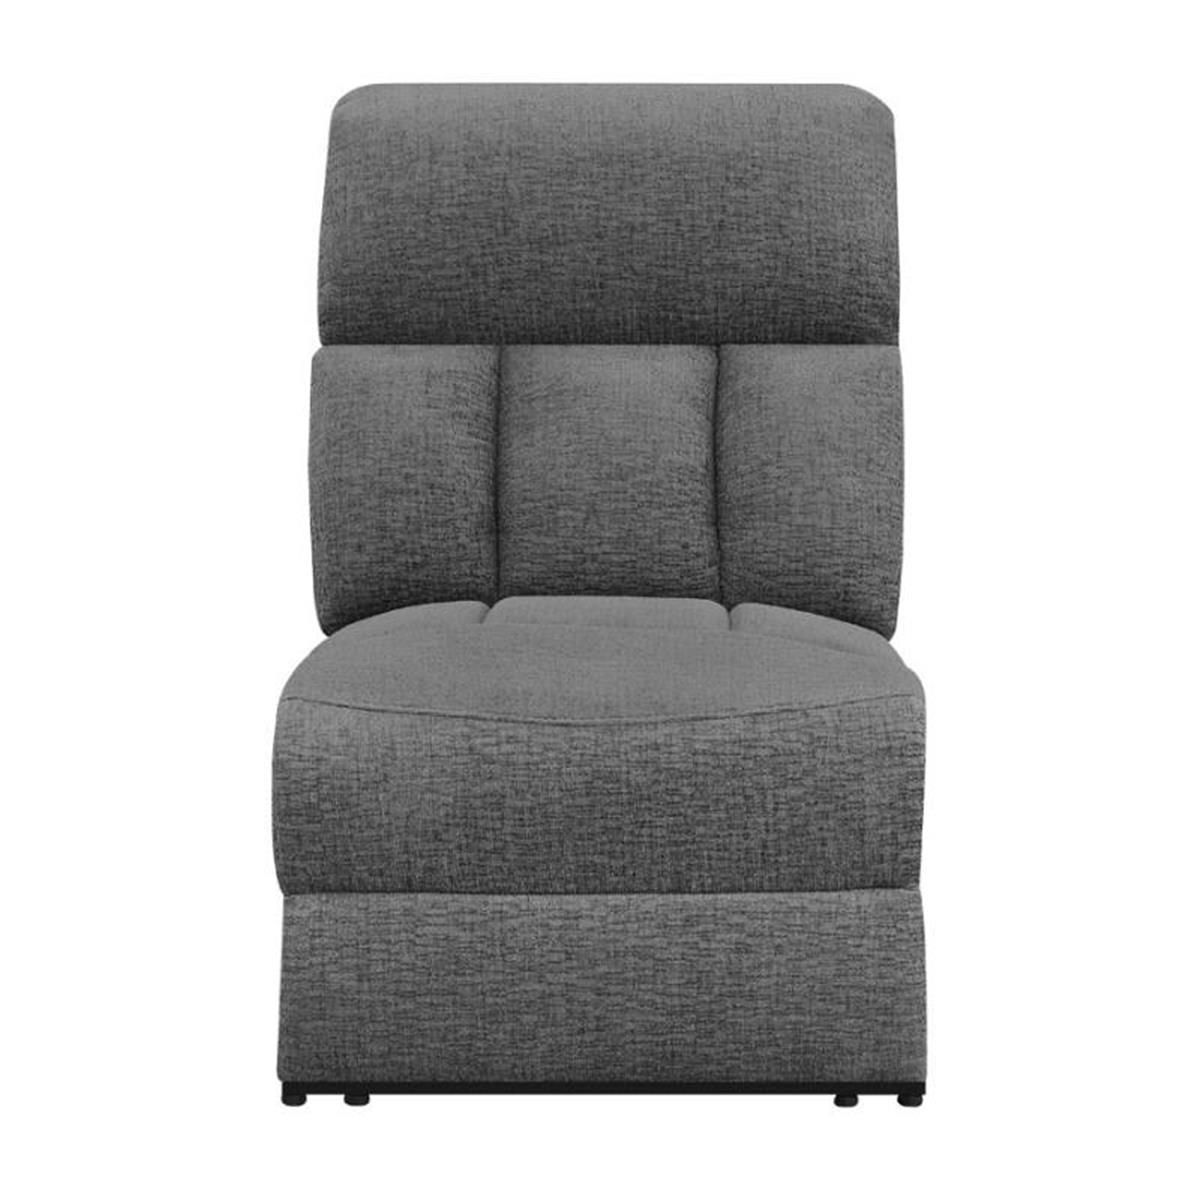 Picture of Coaster Furniture 609540ARP 39.75 x 27.25 x 38.25 in. Armless Power Recliner